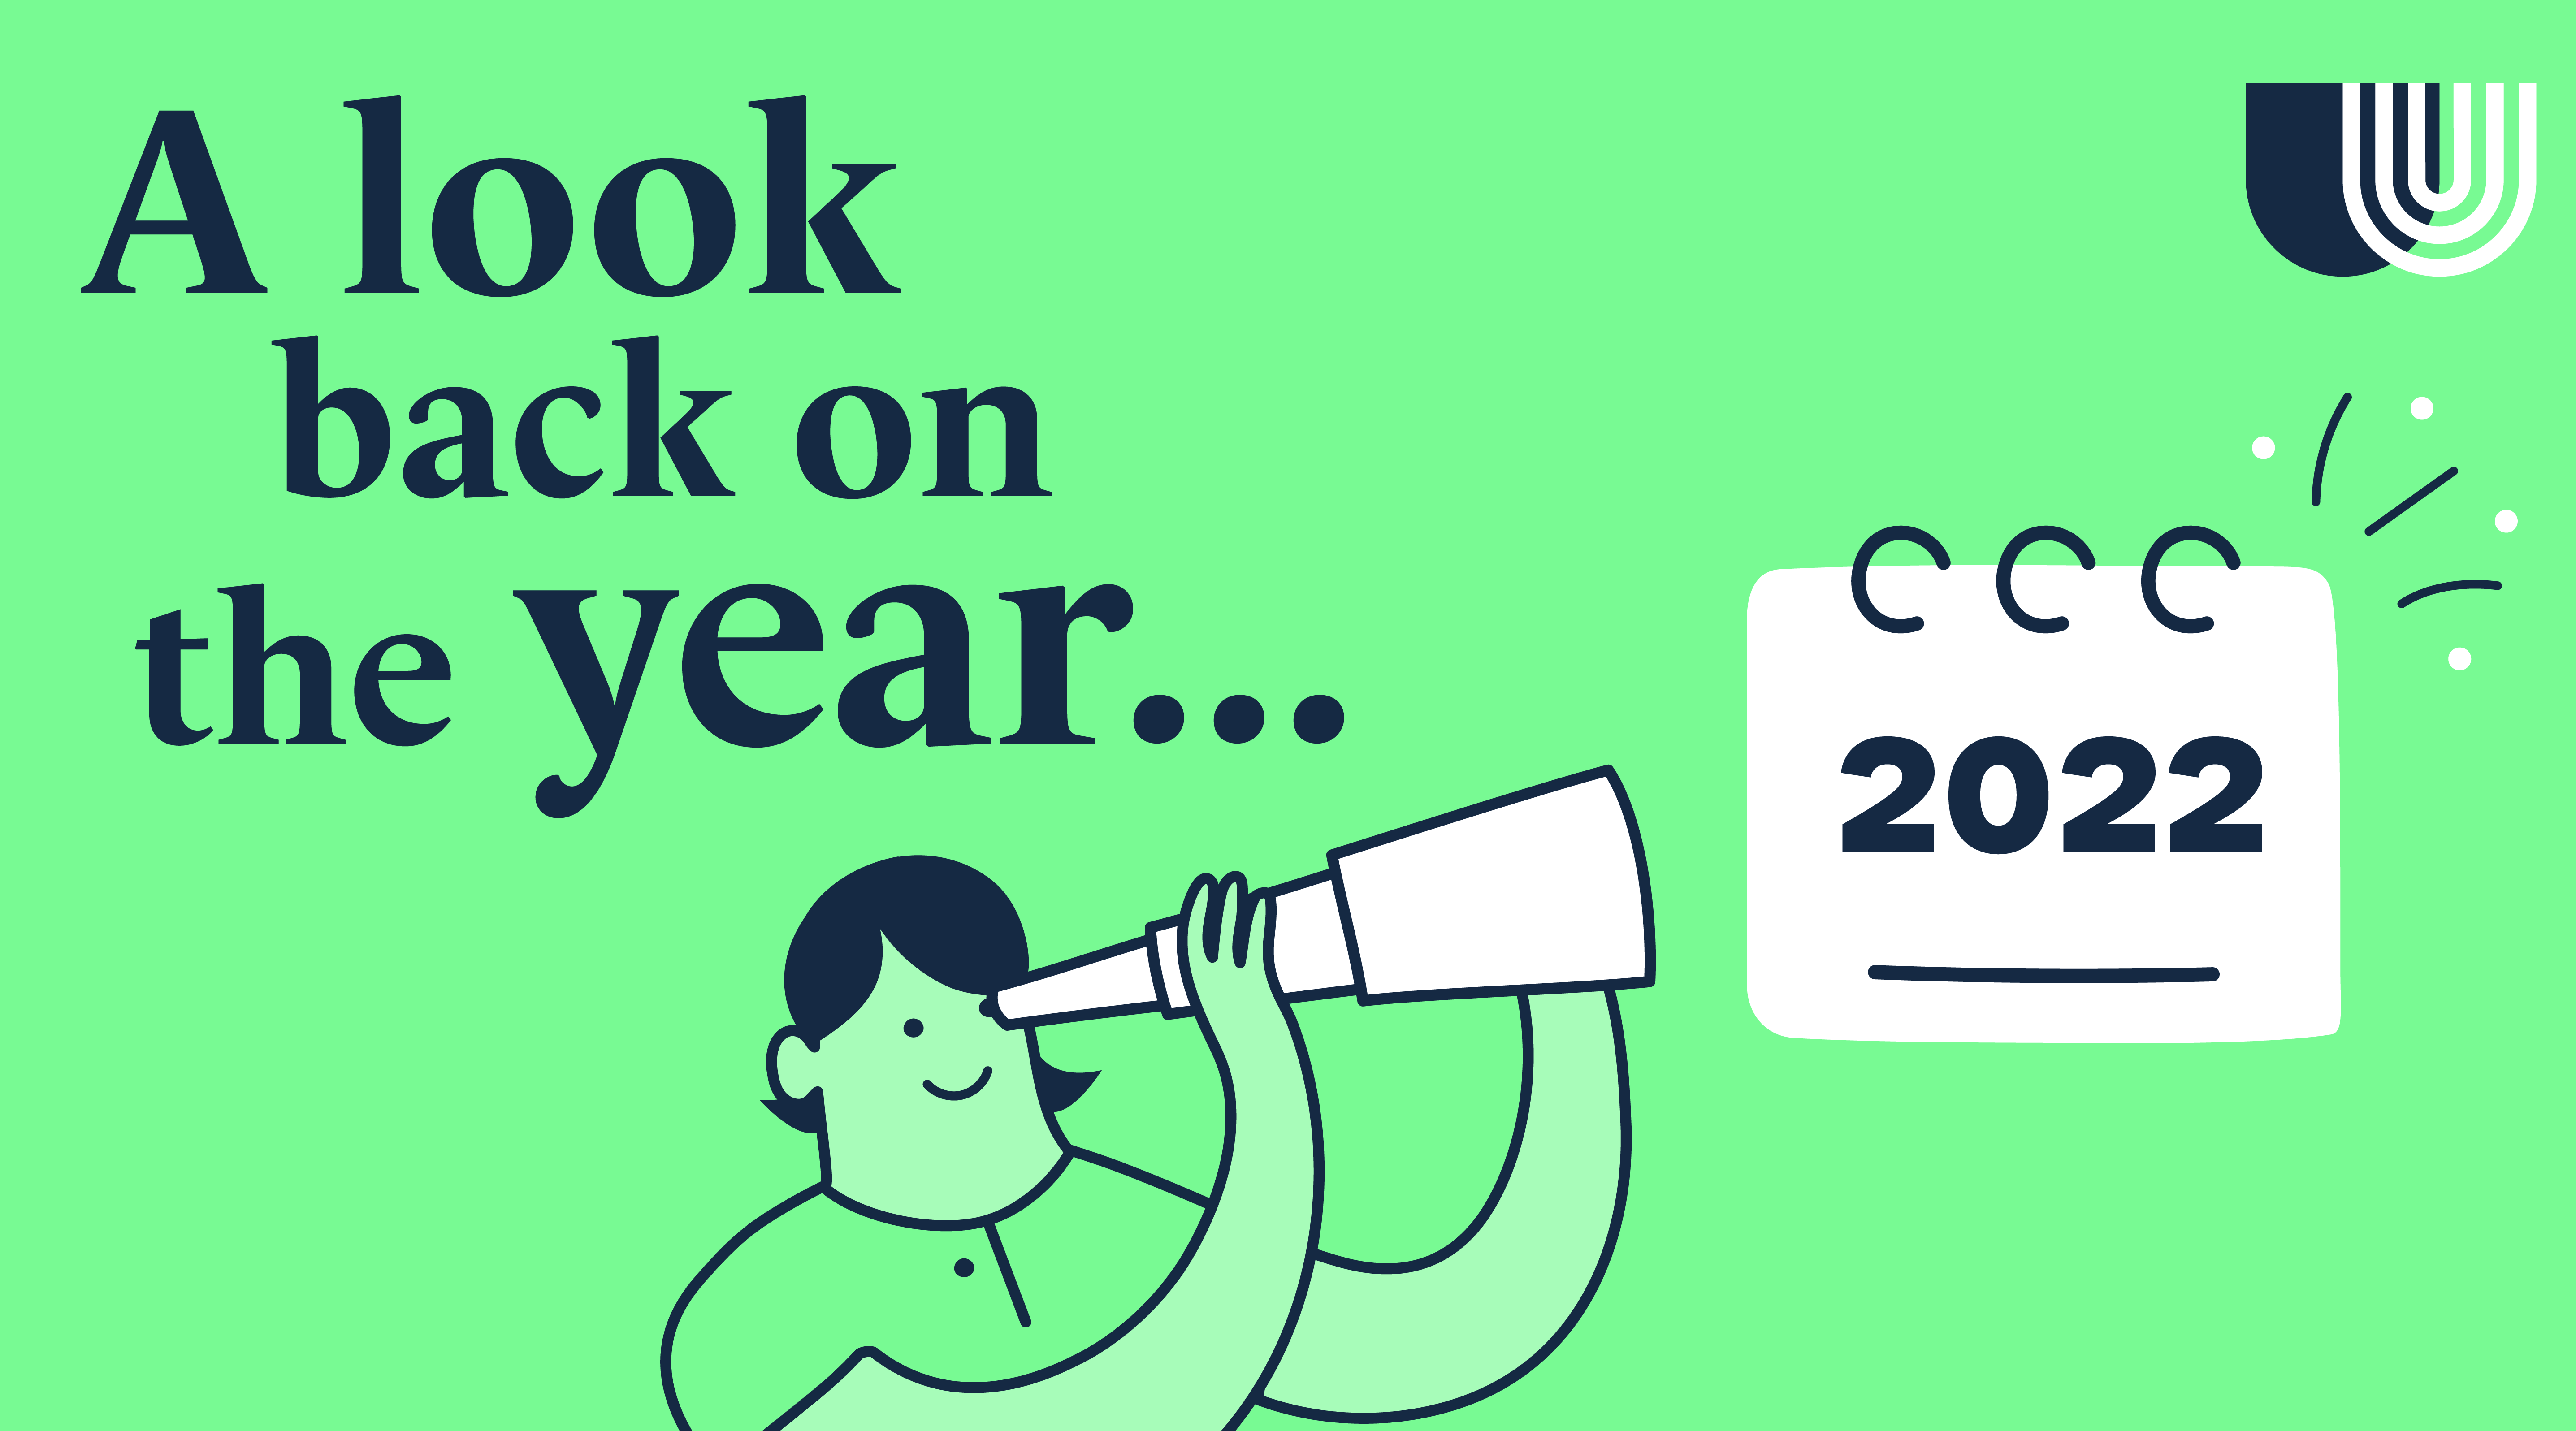 A look back on the year